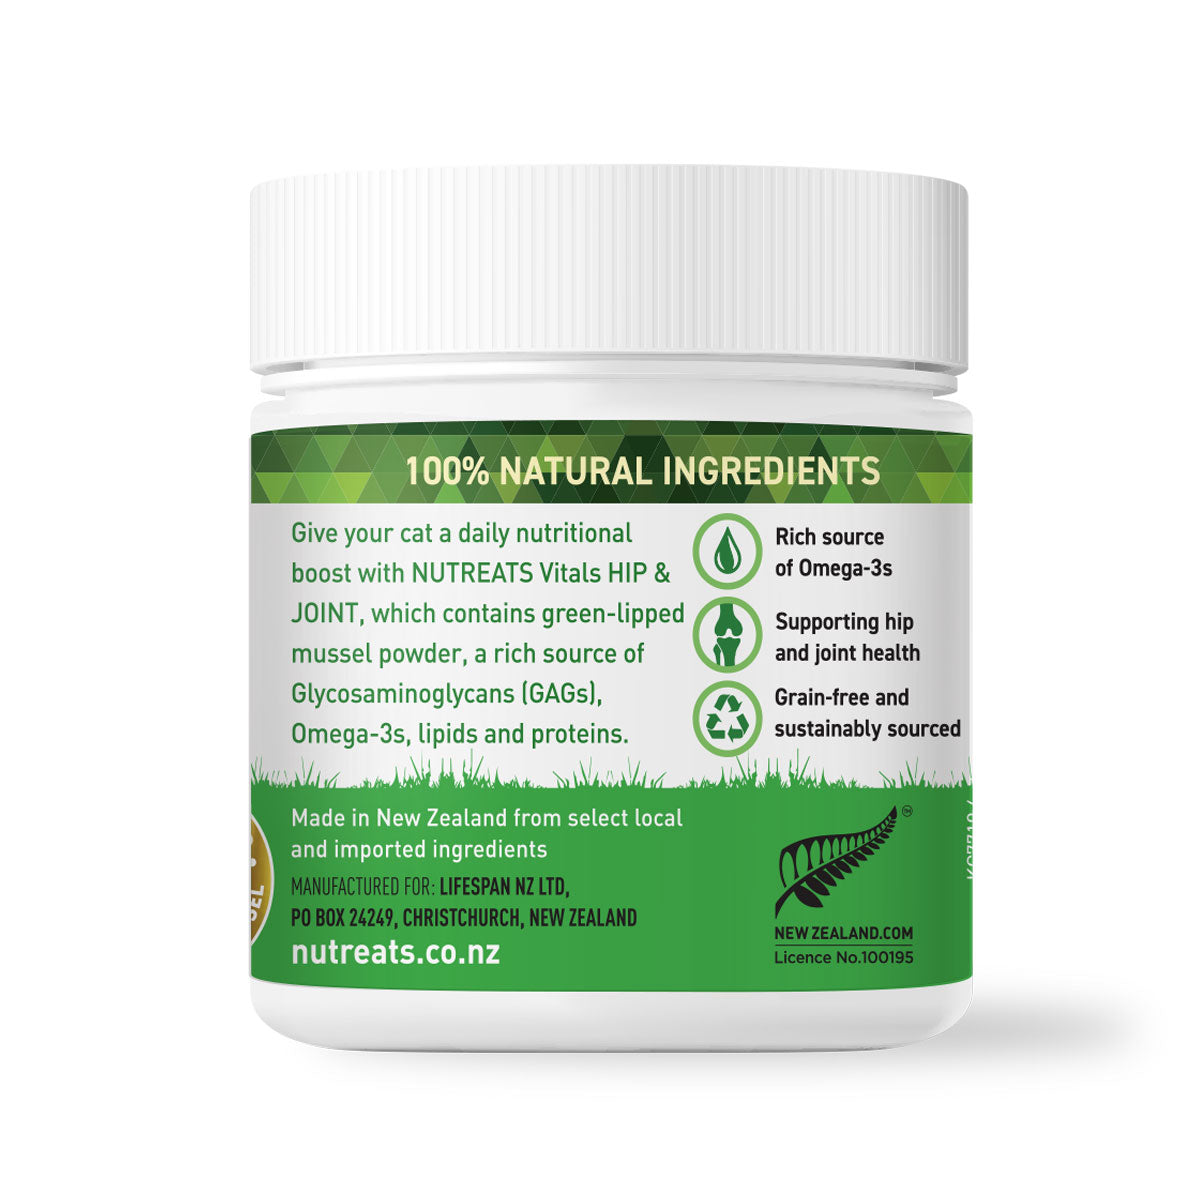 Nutreats Vitals Hip&Joint for cats - a daily nutritional boost containing green-lipped mussel powder, a rich source of Omega-3s, lipids and proteins. Supporting cats hip & joint health. Sustainably sourced and grain free.